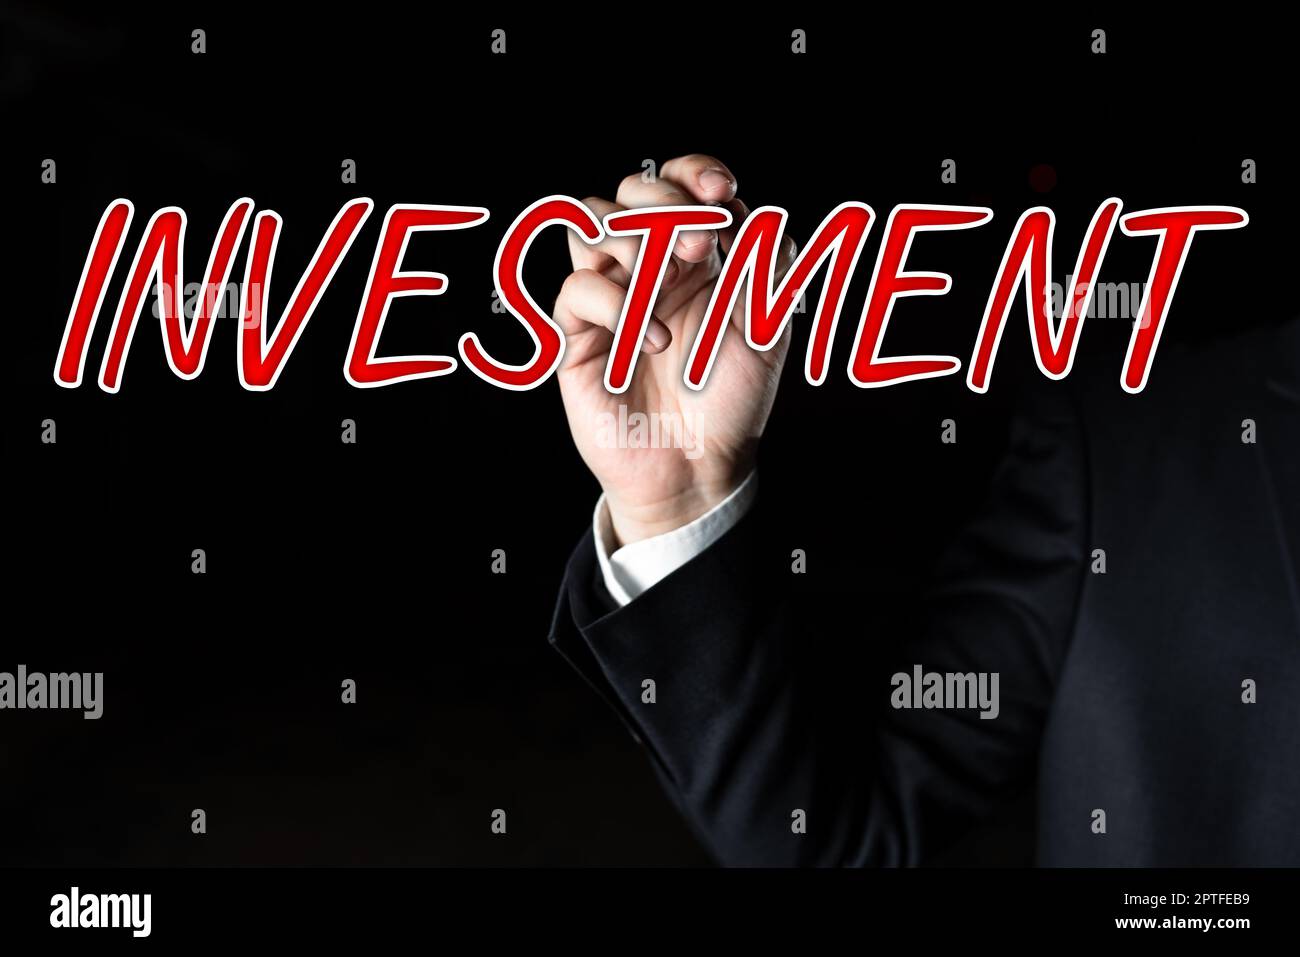 Text sign showing Investment, Business idea right or license granted to an individual or group to market Stock Photo